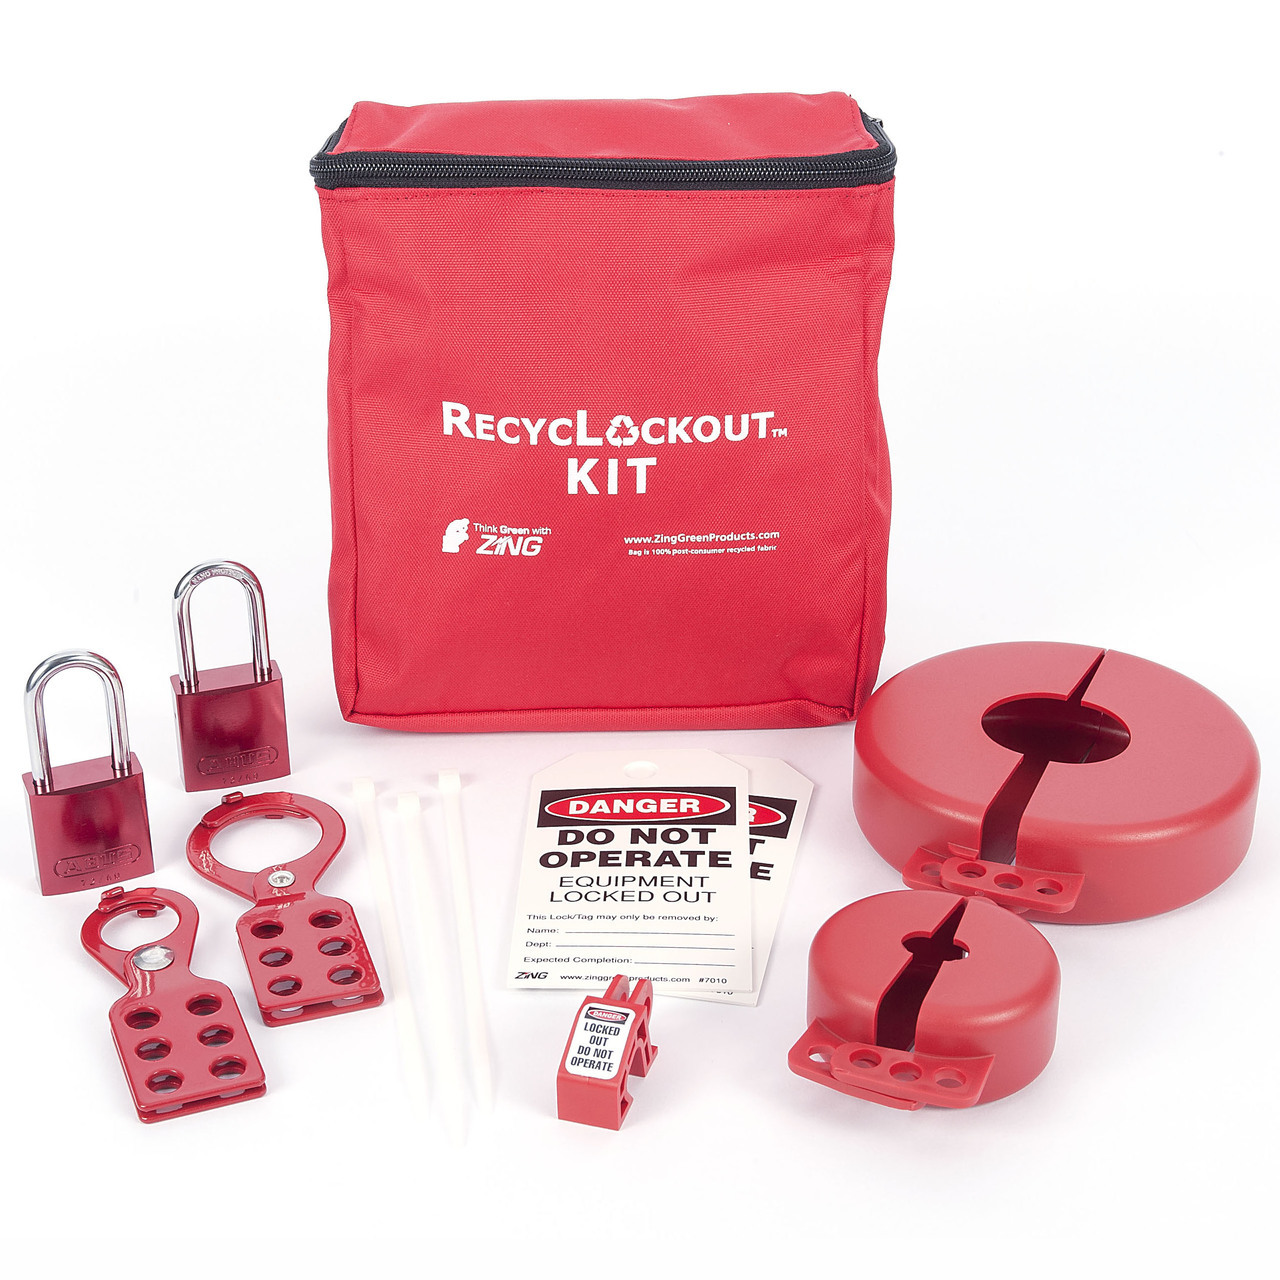 ZING RecycLockout Lockout Tagout Kit with Aluminum Padlocks, 12 Component, Valve Lockout